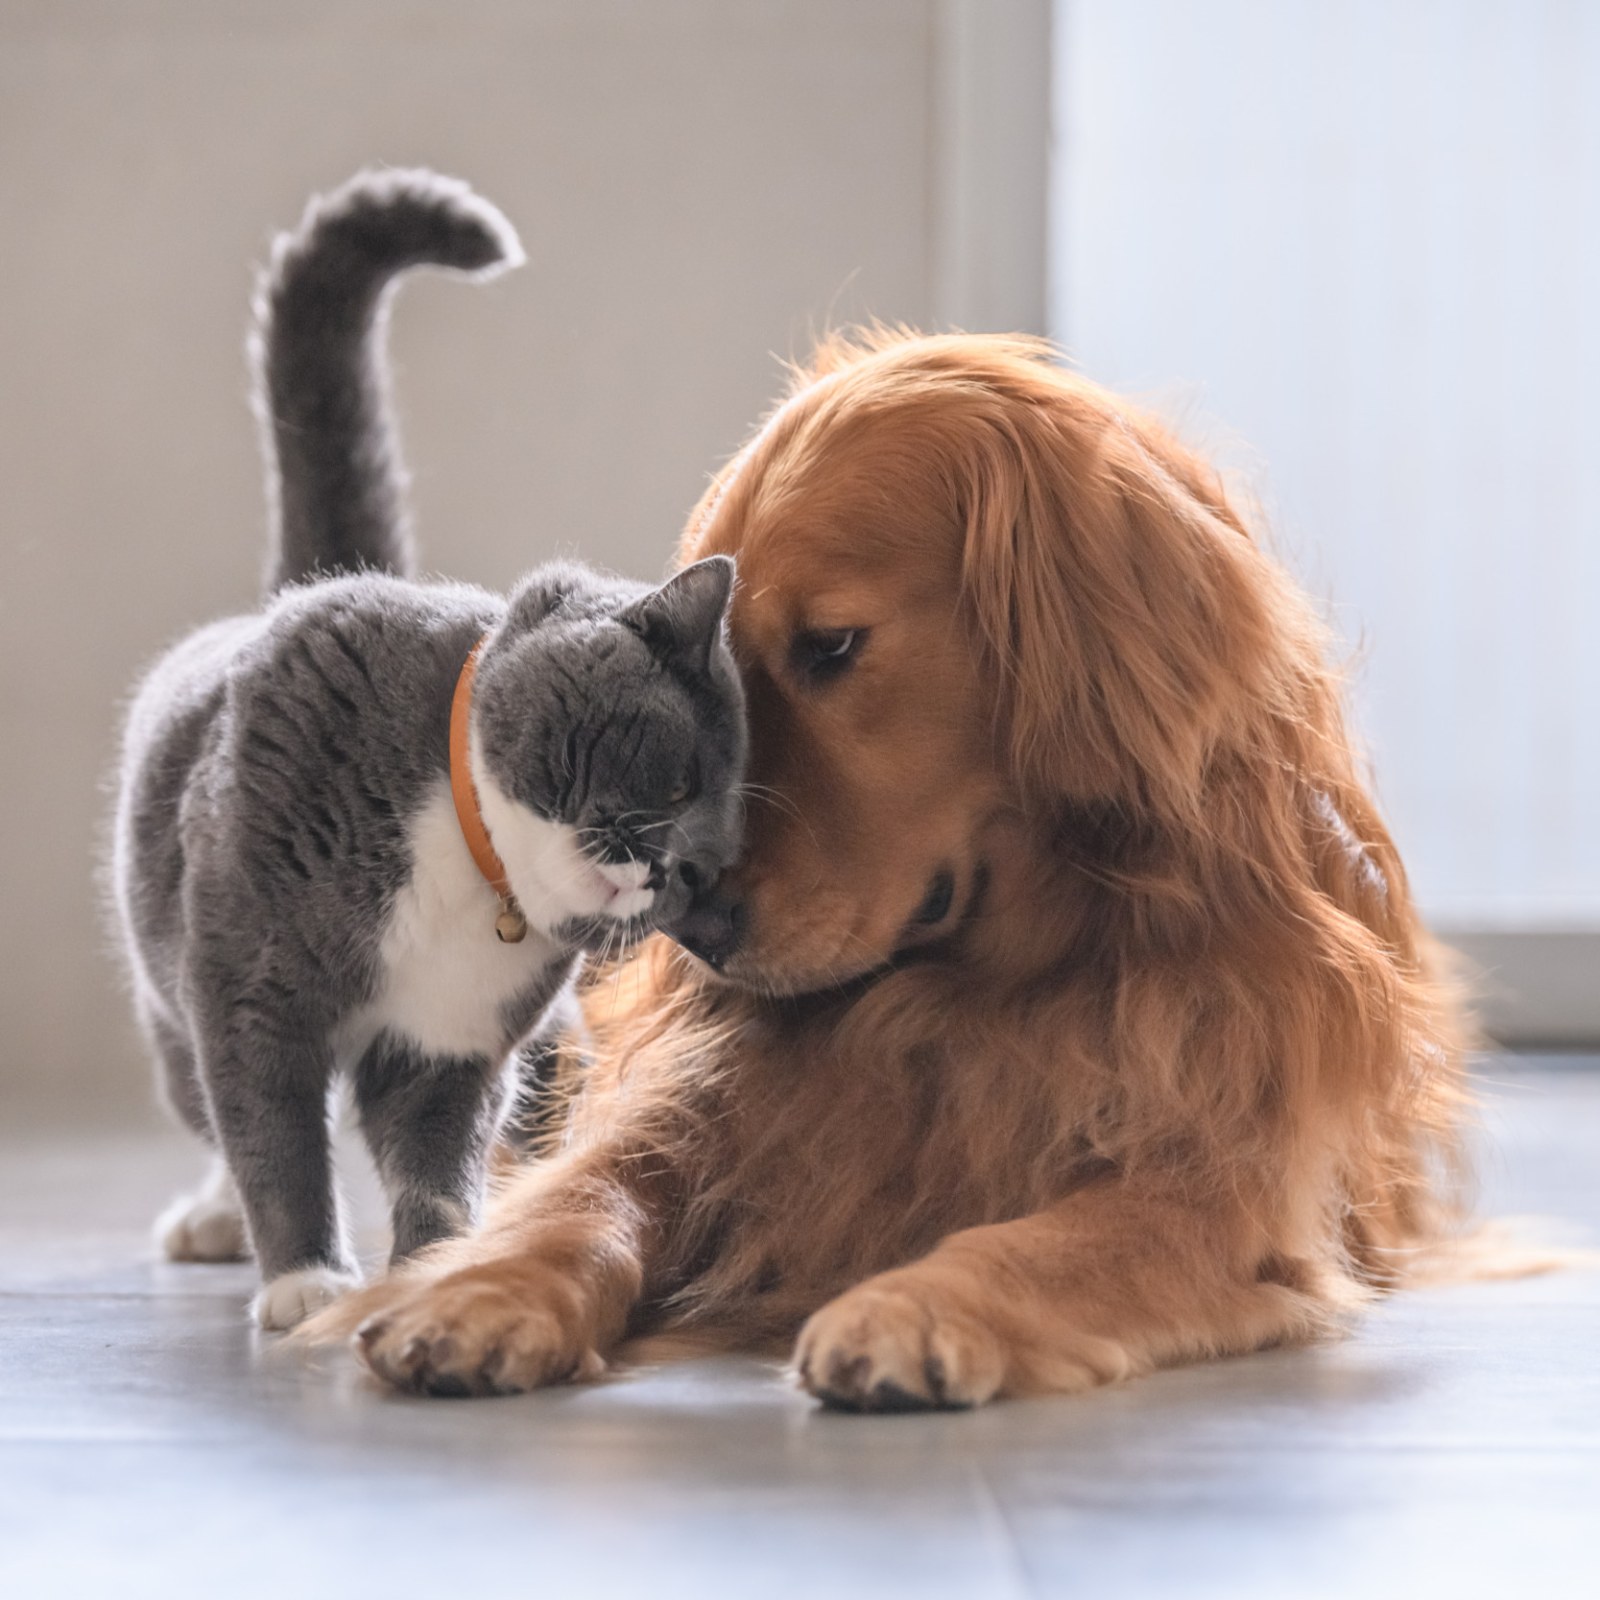 Owner Shares Adorable Video Of Difference Between Her Cat And Dog